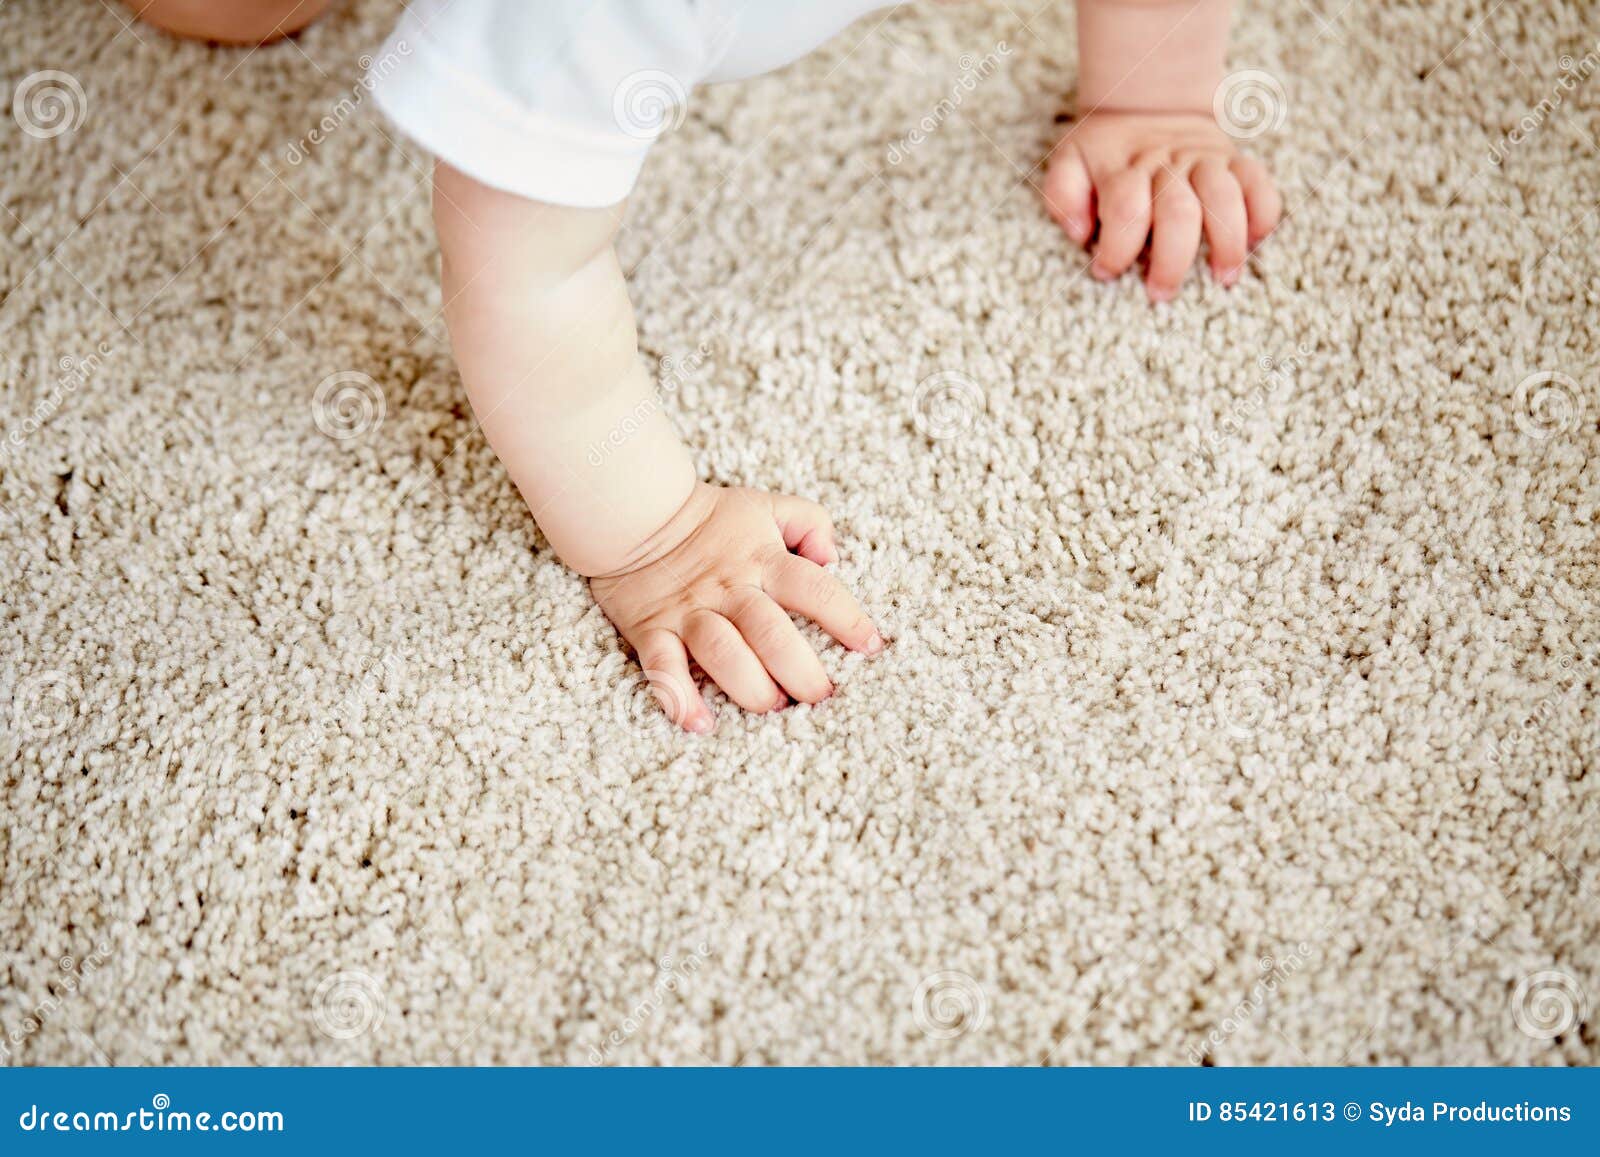 hands of baby crawling on floor or carpet